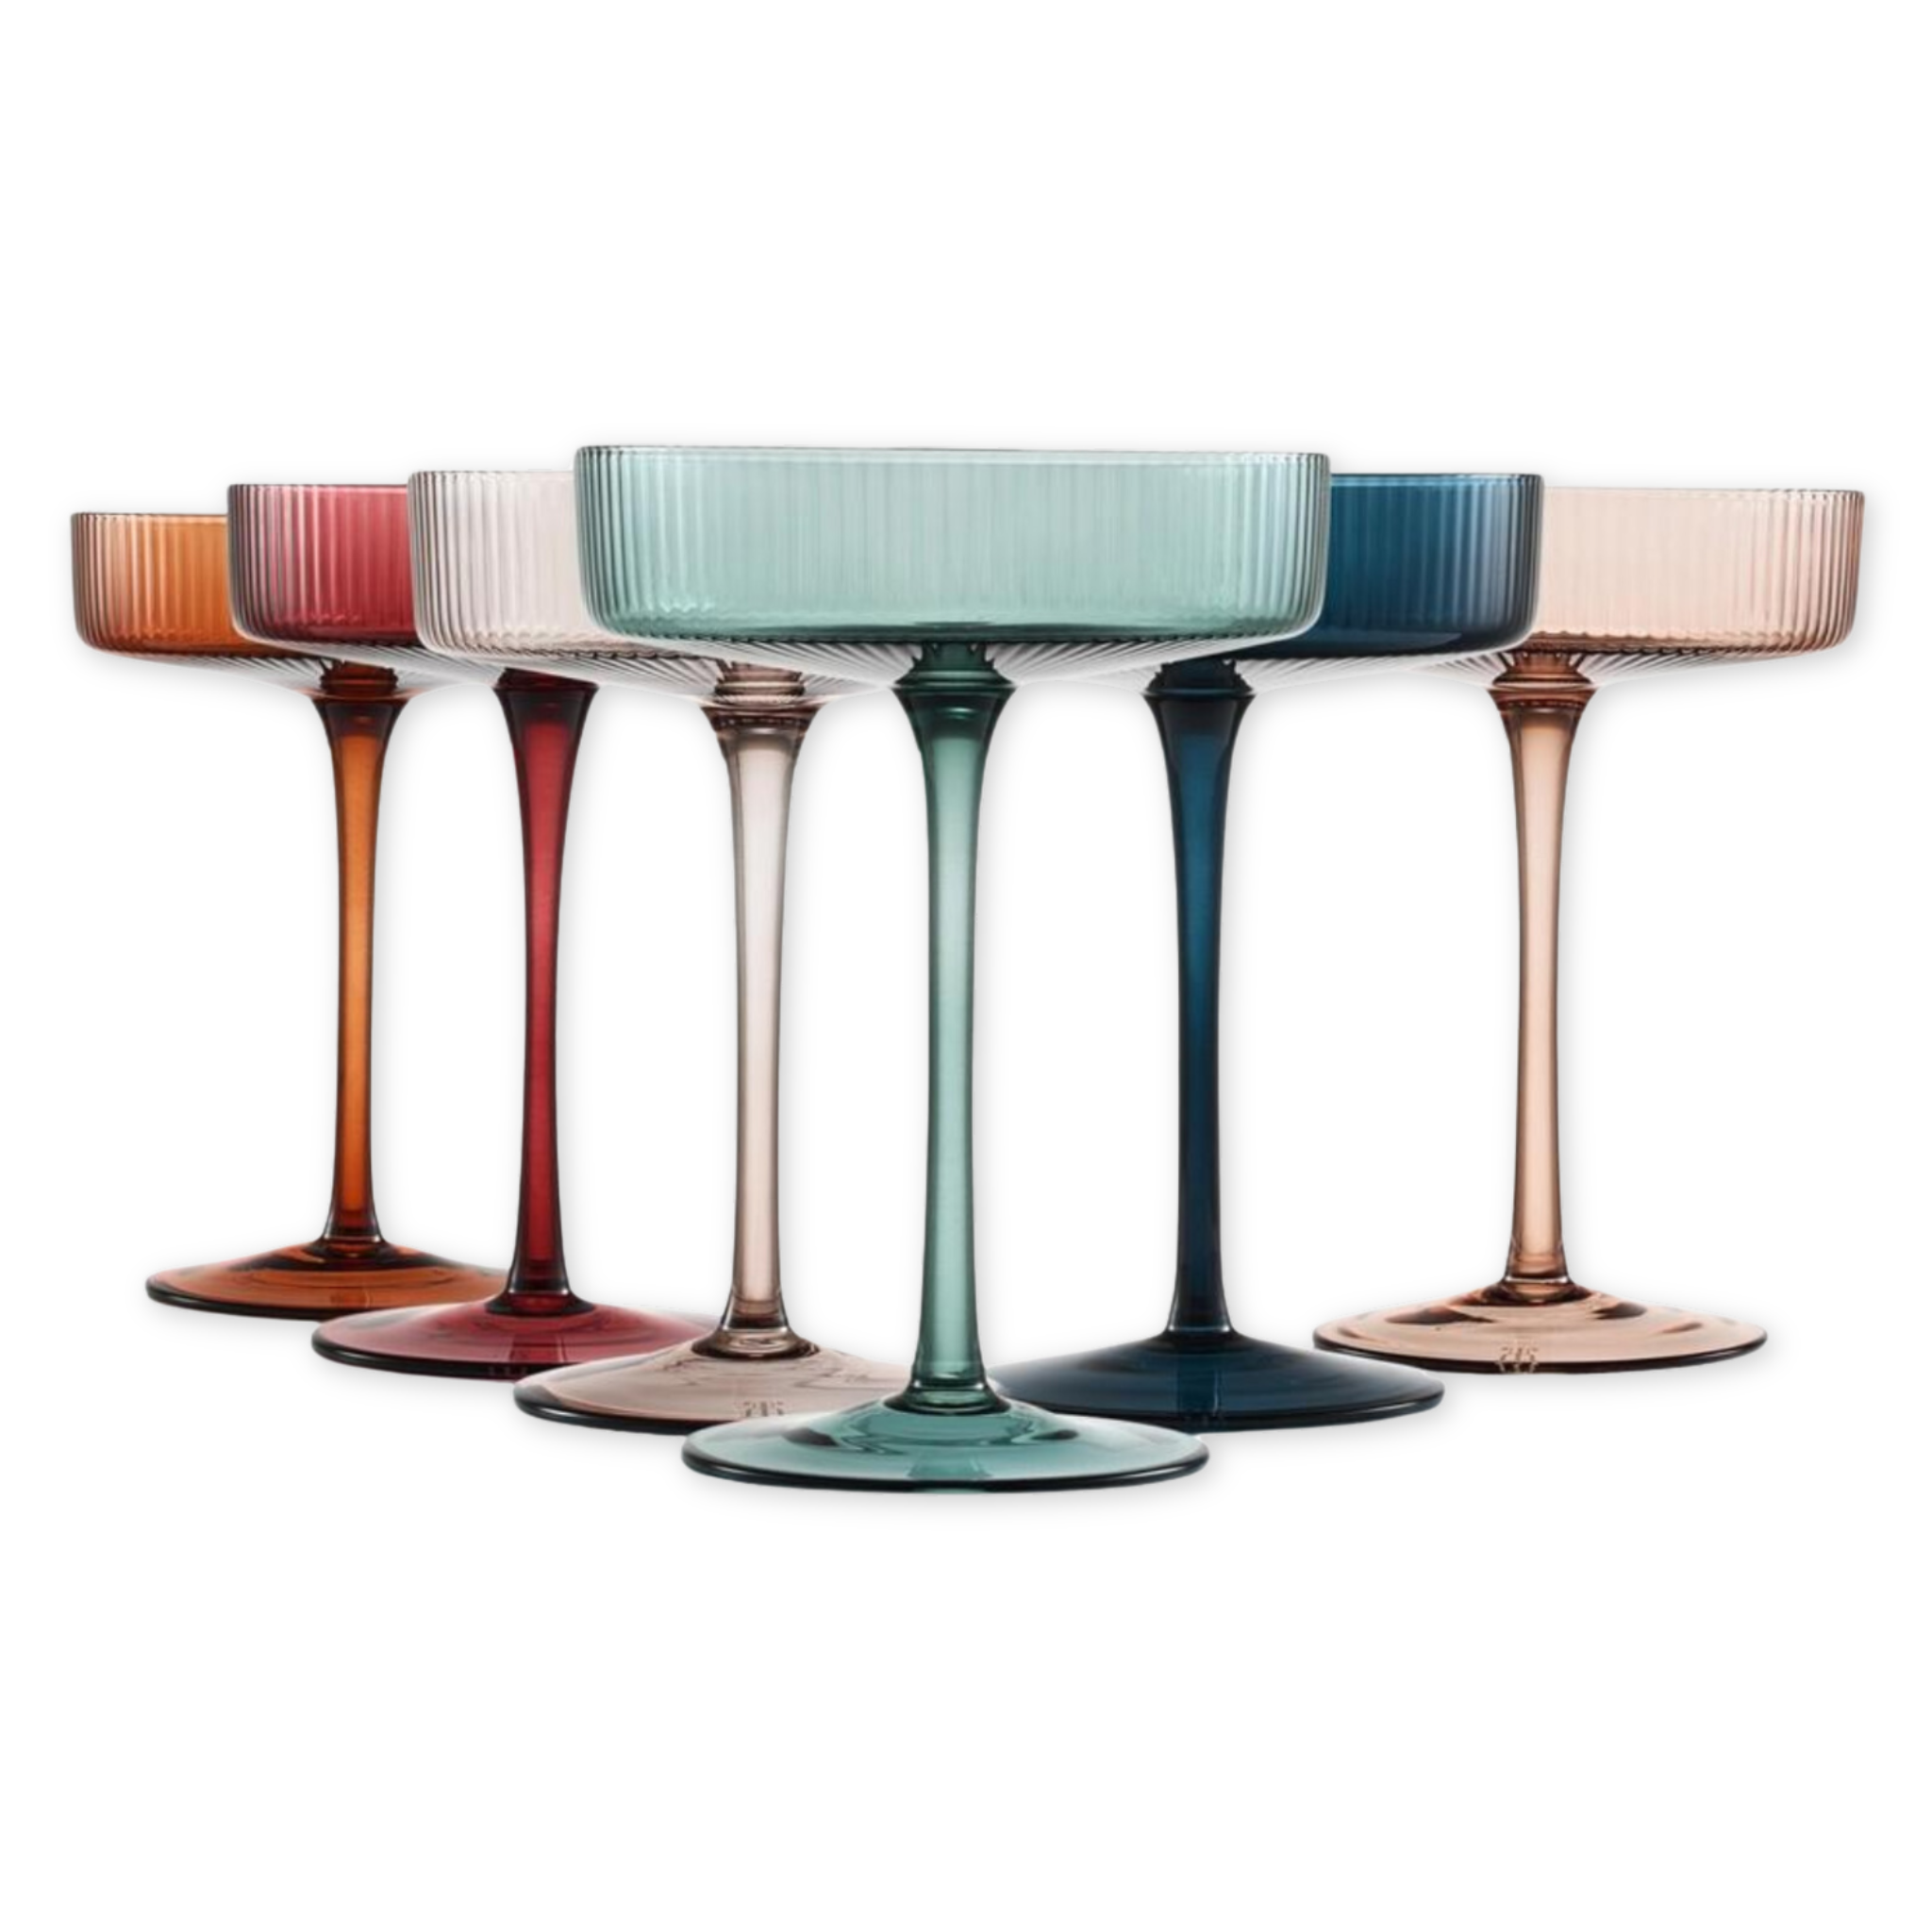 set of six coupe glasses in different colors